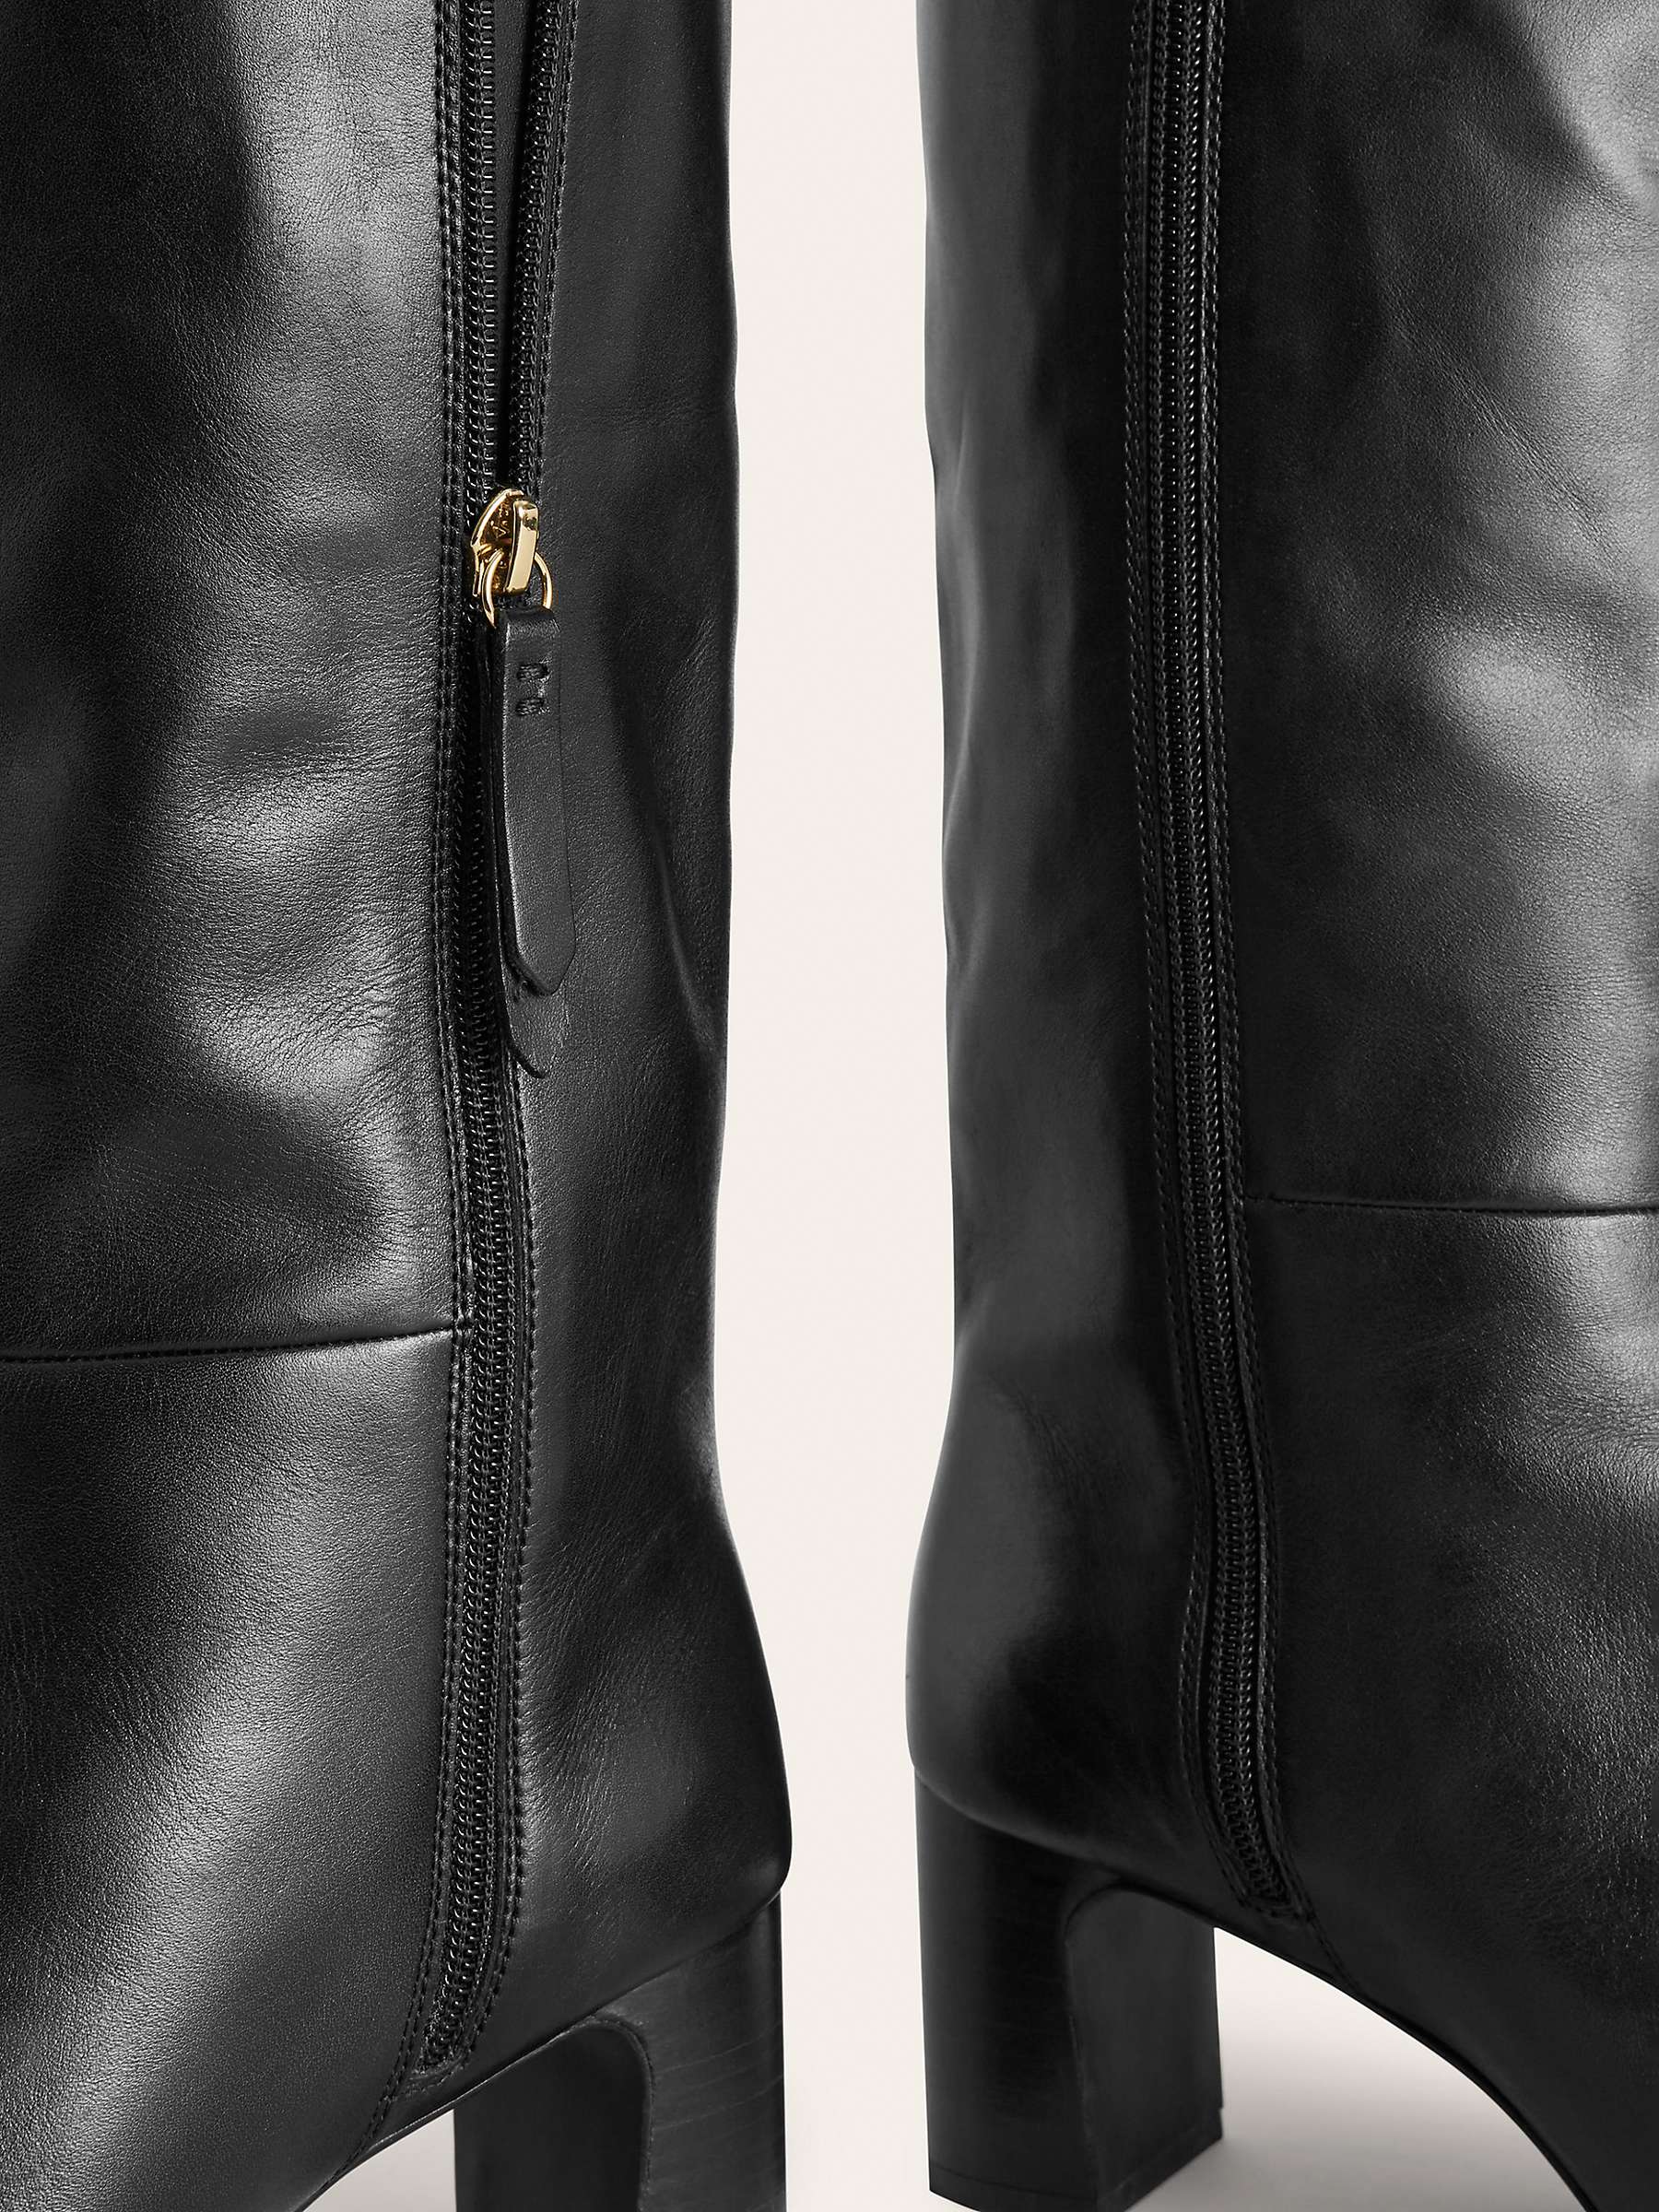 Buy Boden Erica Knee High Leather Boots Online at johnlewis.com